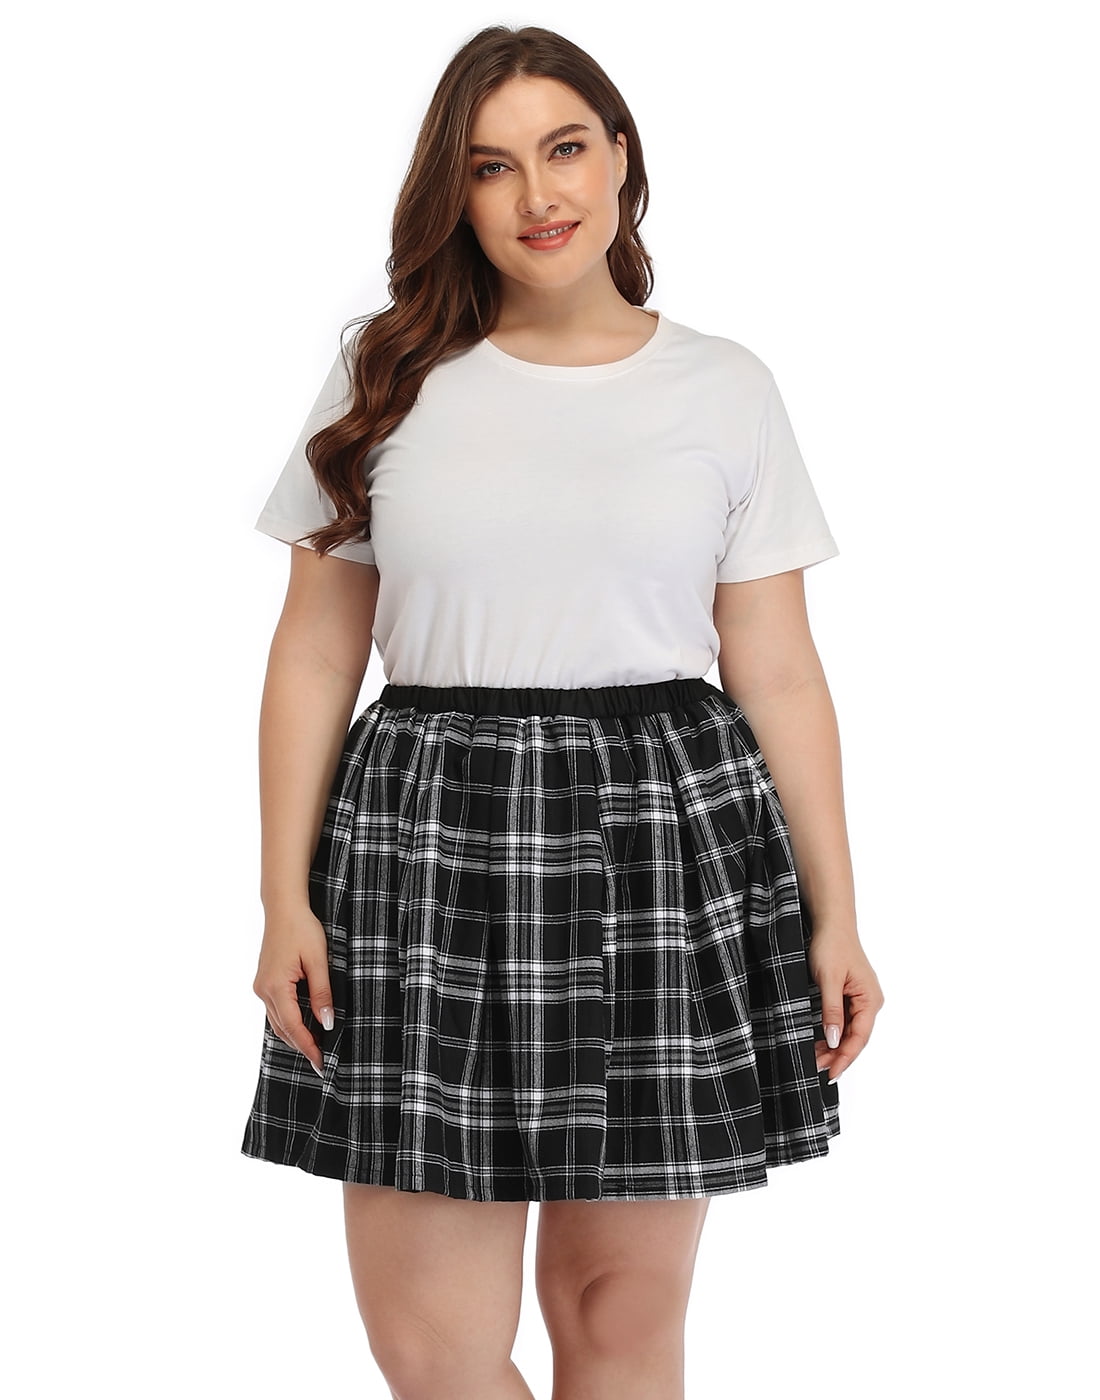 Shopping made easy and fun Women Men Plaid Skirt Low Rise Pleated Mini ...